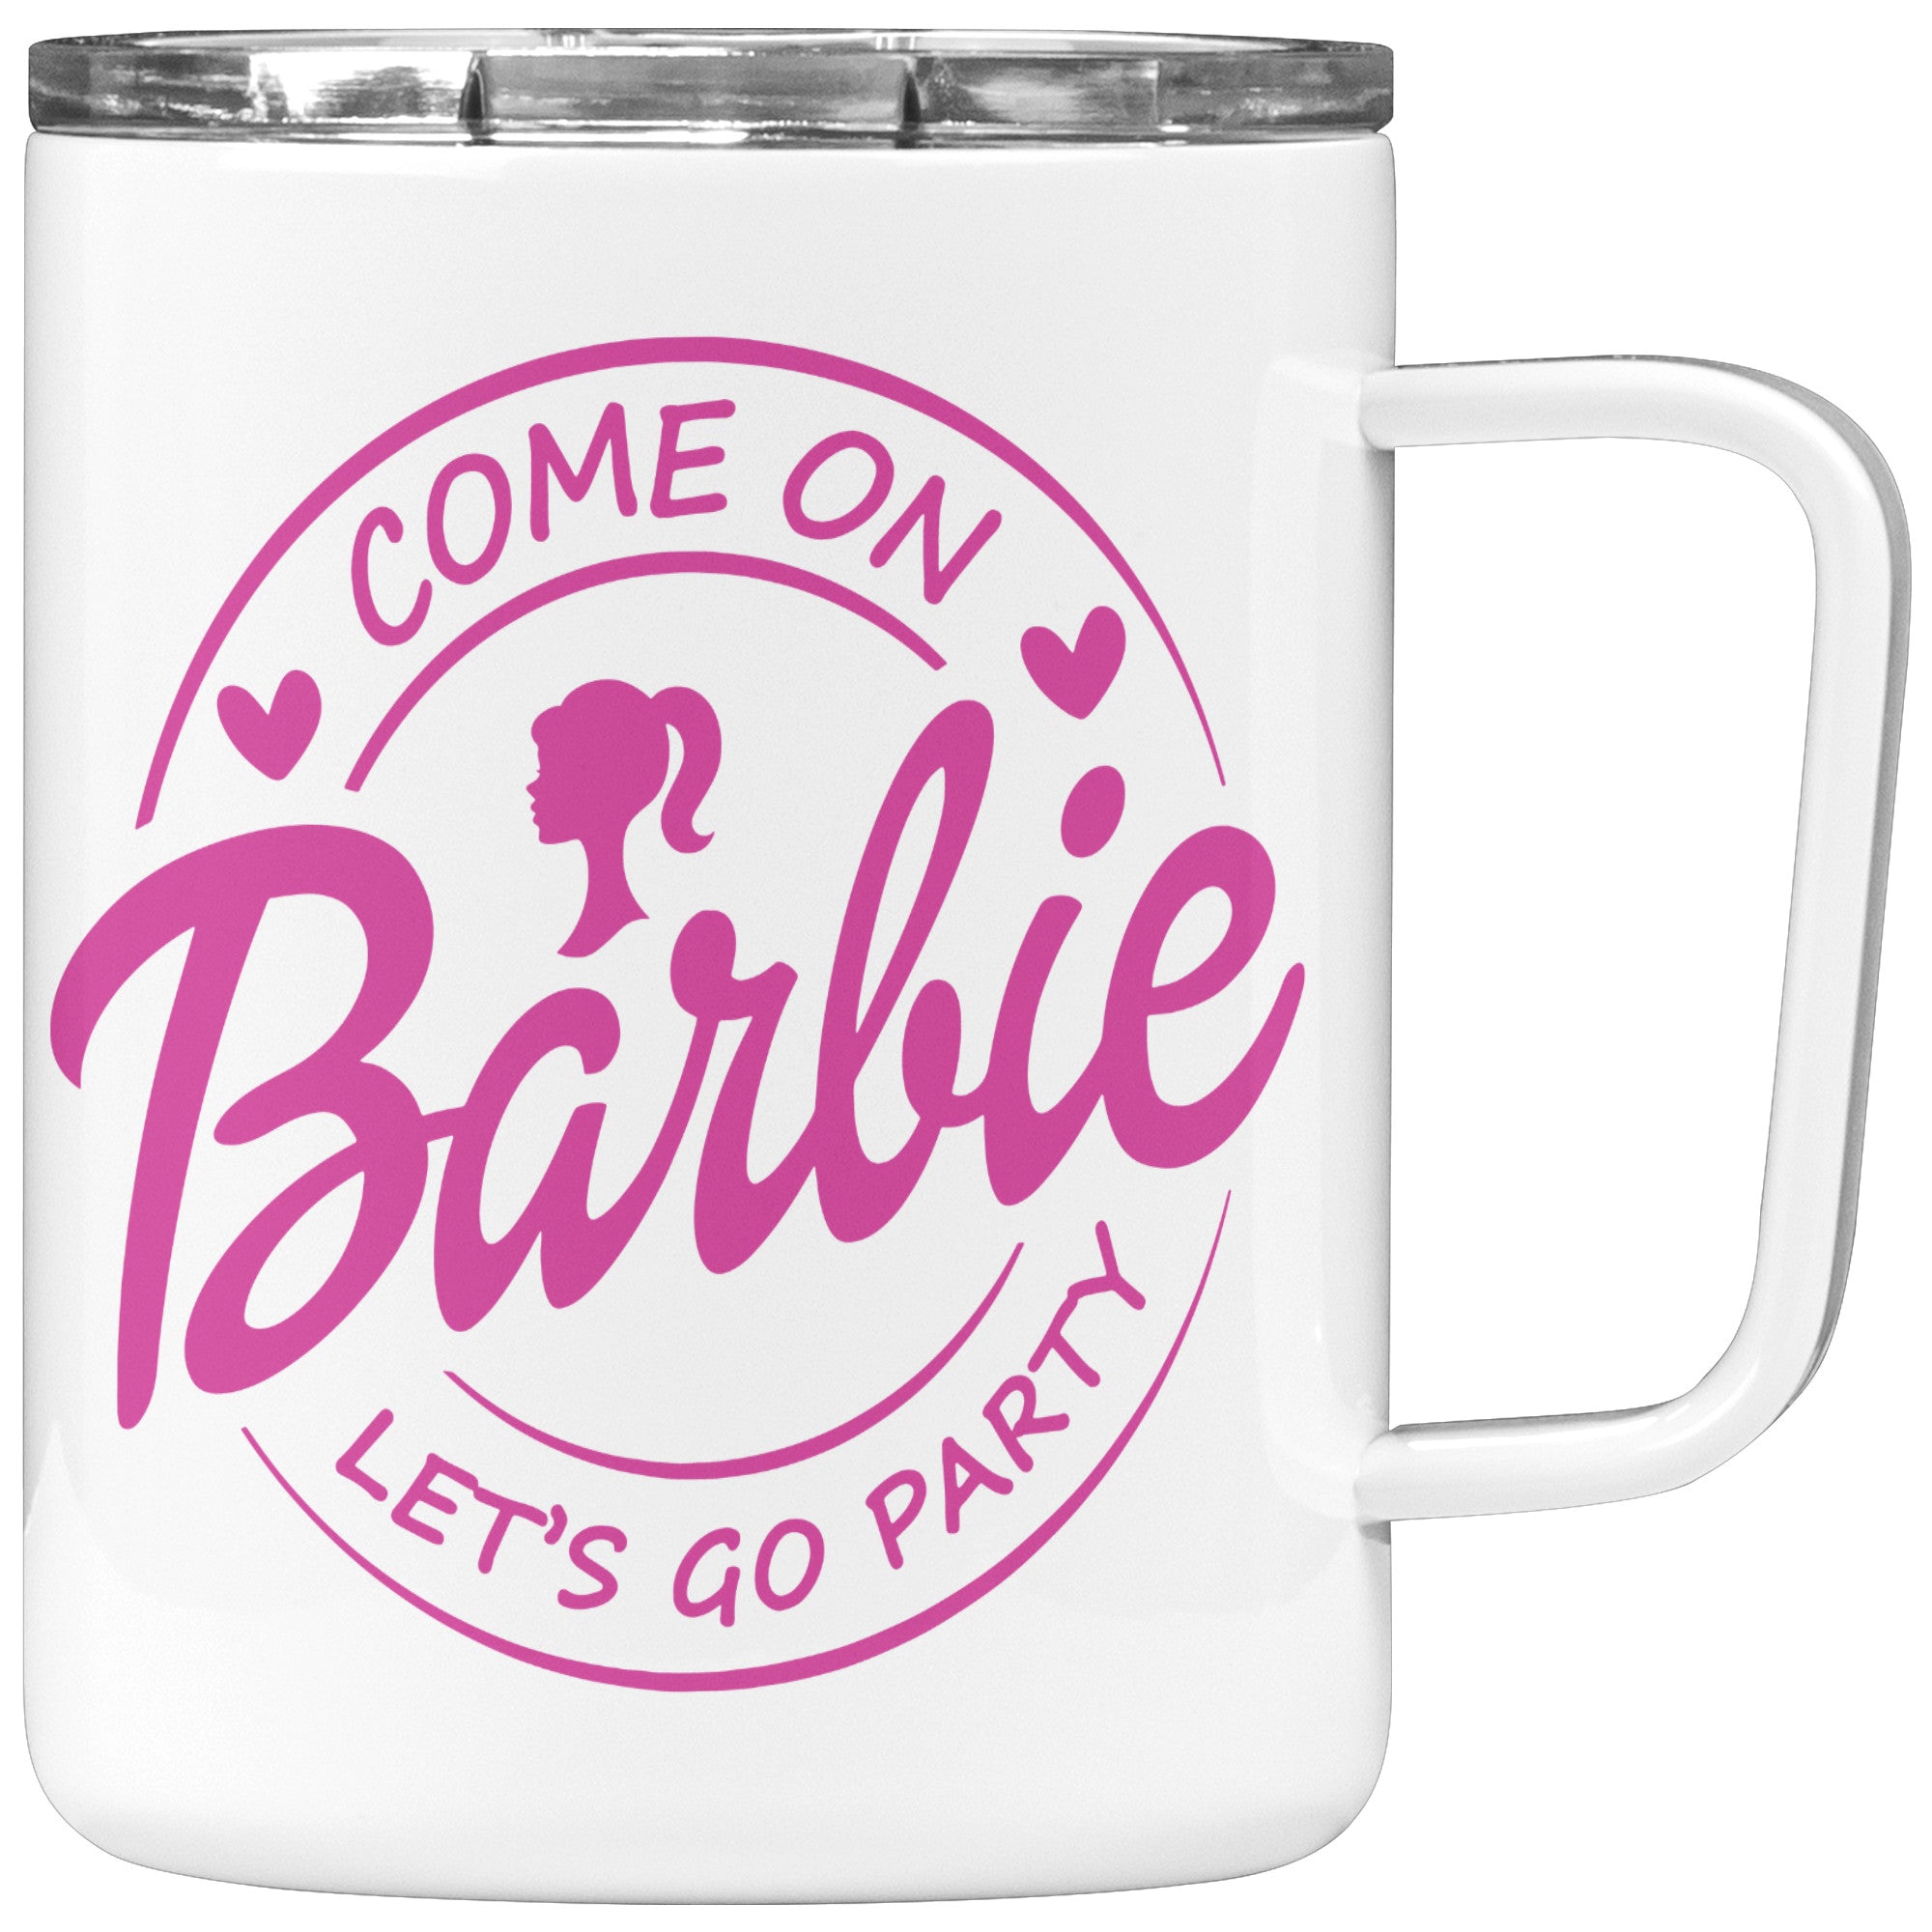 Come on Barbie, let's go Party! - household items - by owner